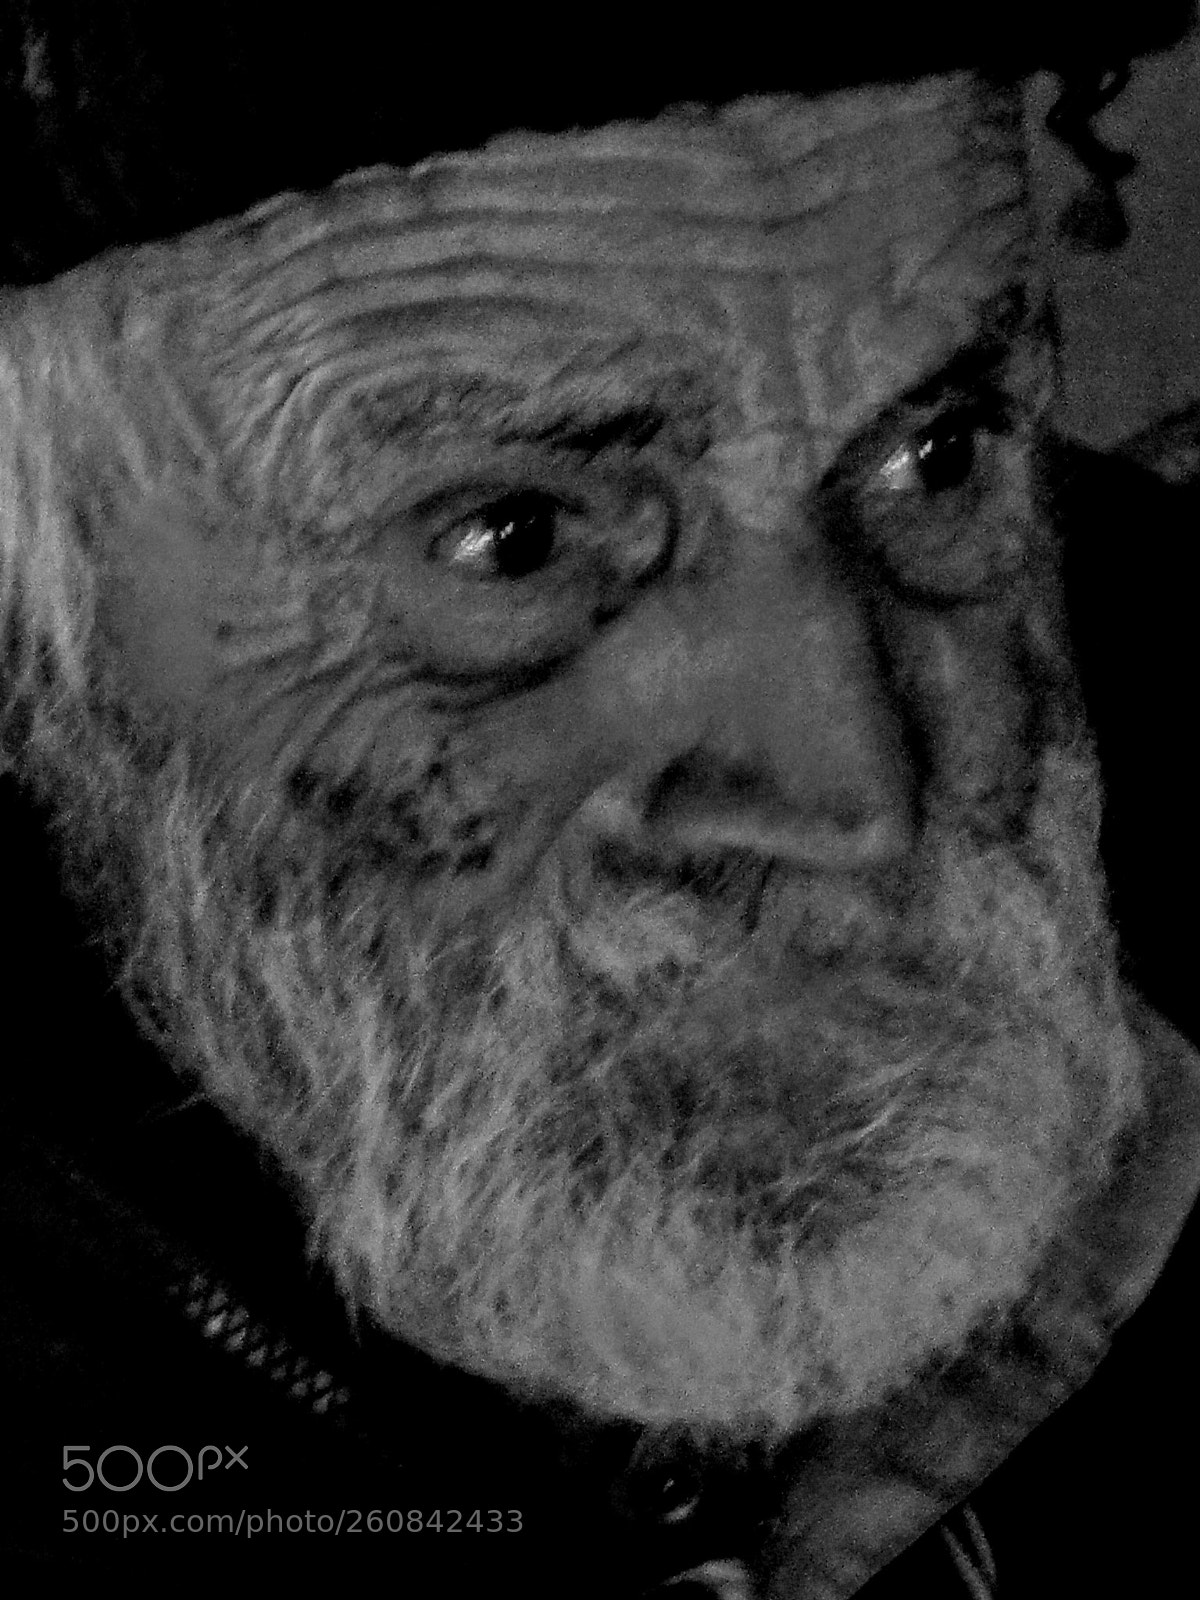 Canon PowerShot G12 sample photo. Old and tired man photography